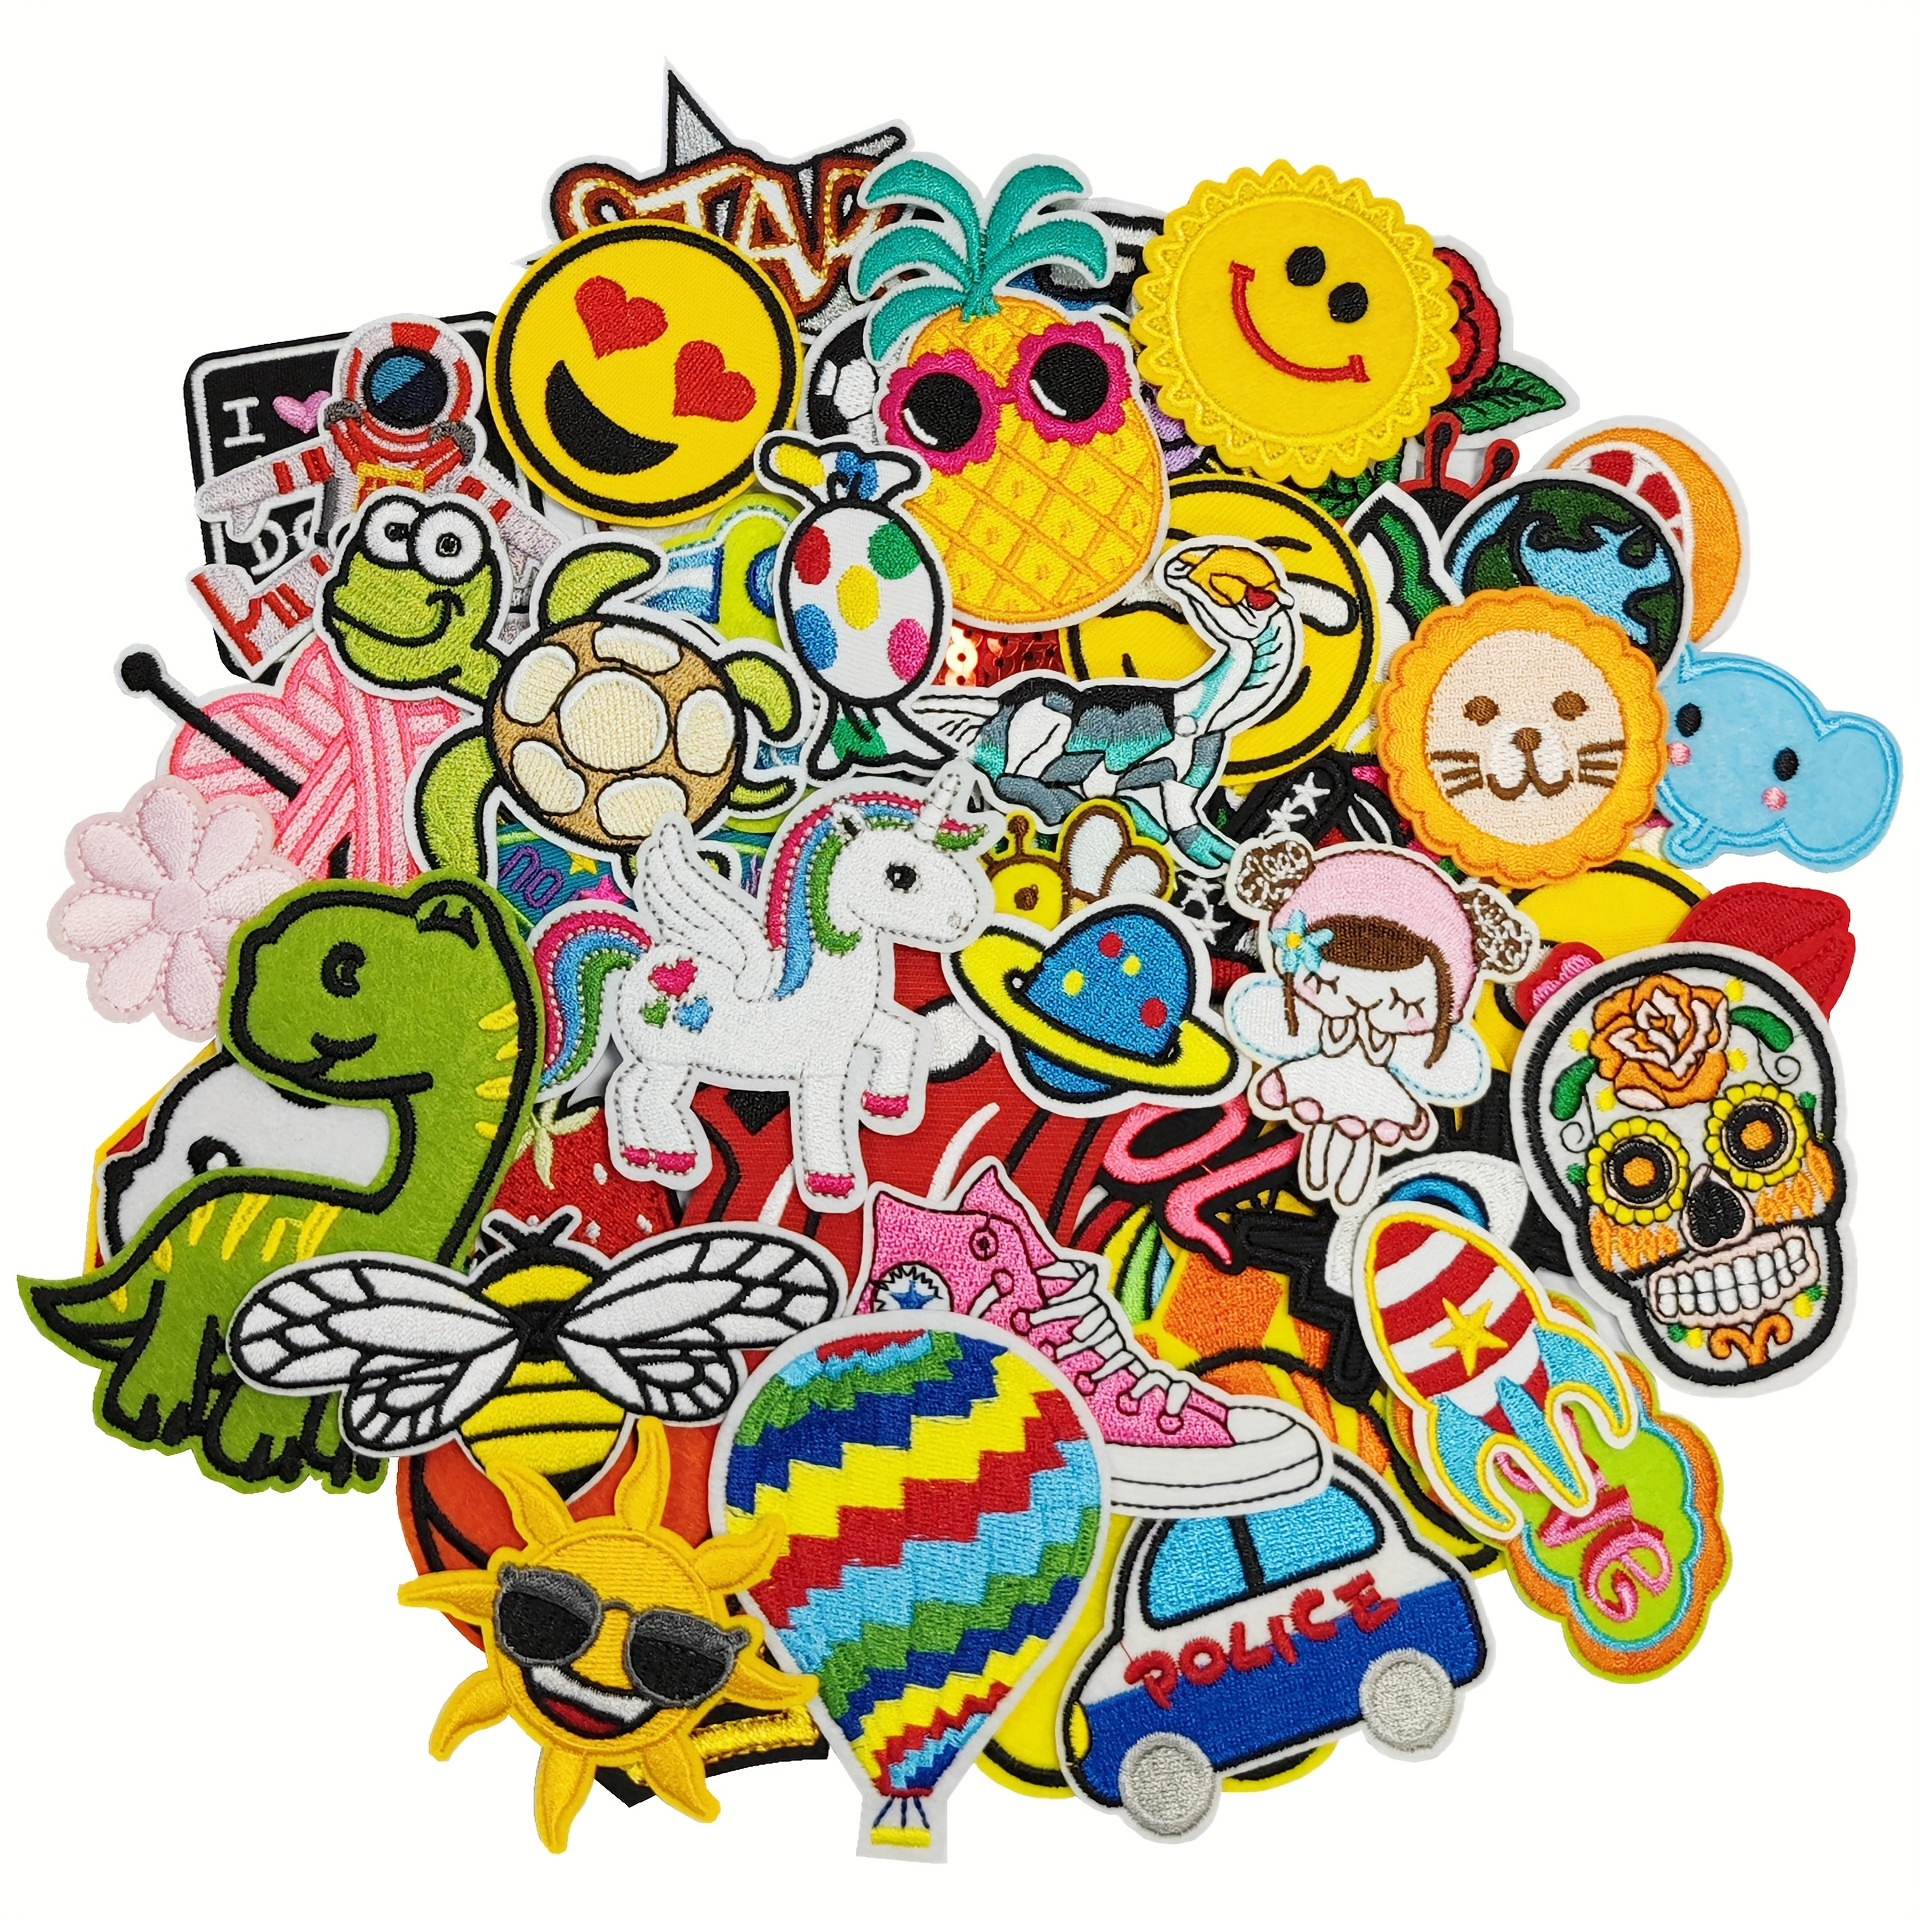 

60-piece Mixed Design Iron-on/sew-on Patches - Cartoon, Fruit, Floral & Animal Embroidery Appliques For Clothing, Bags & Diy Crafts